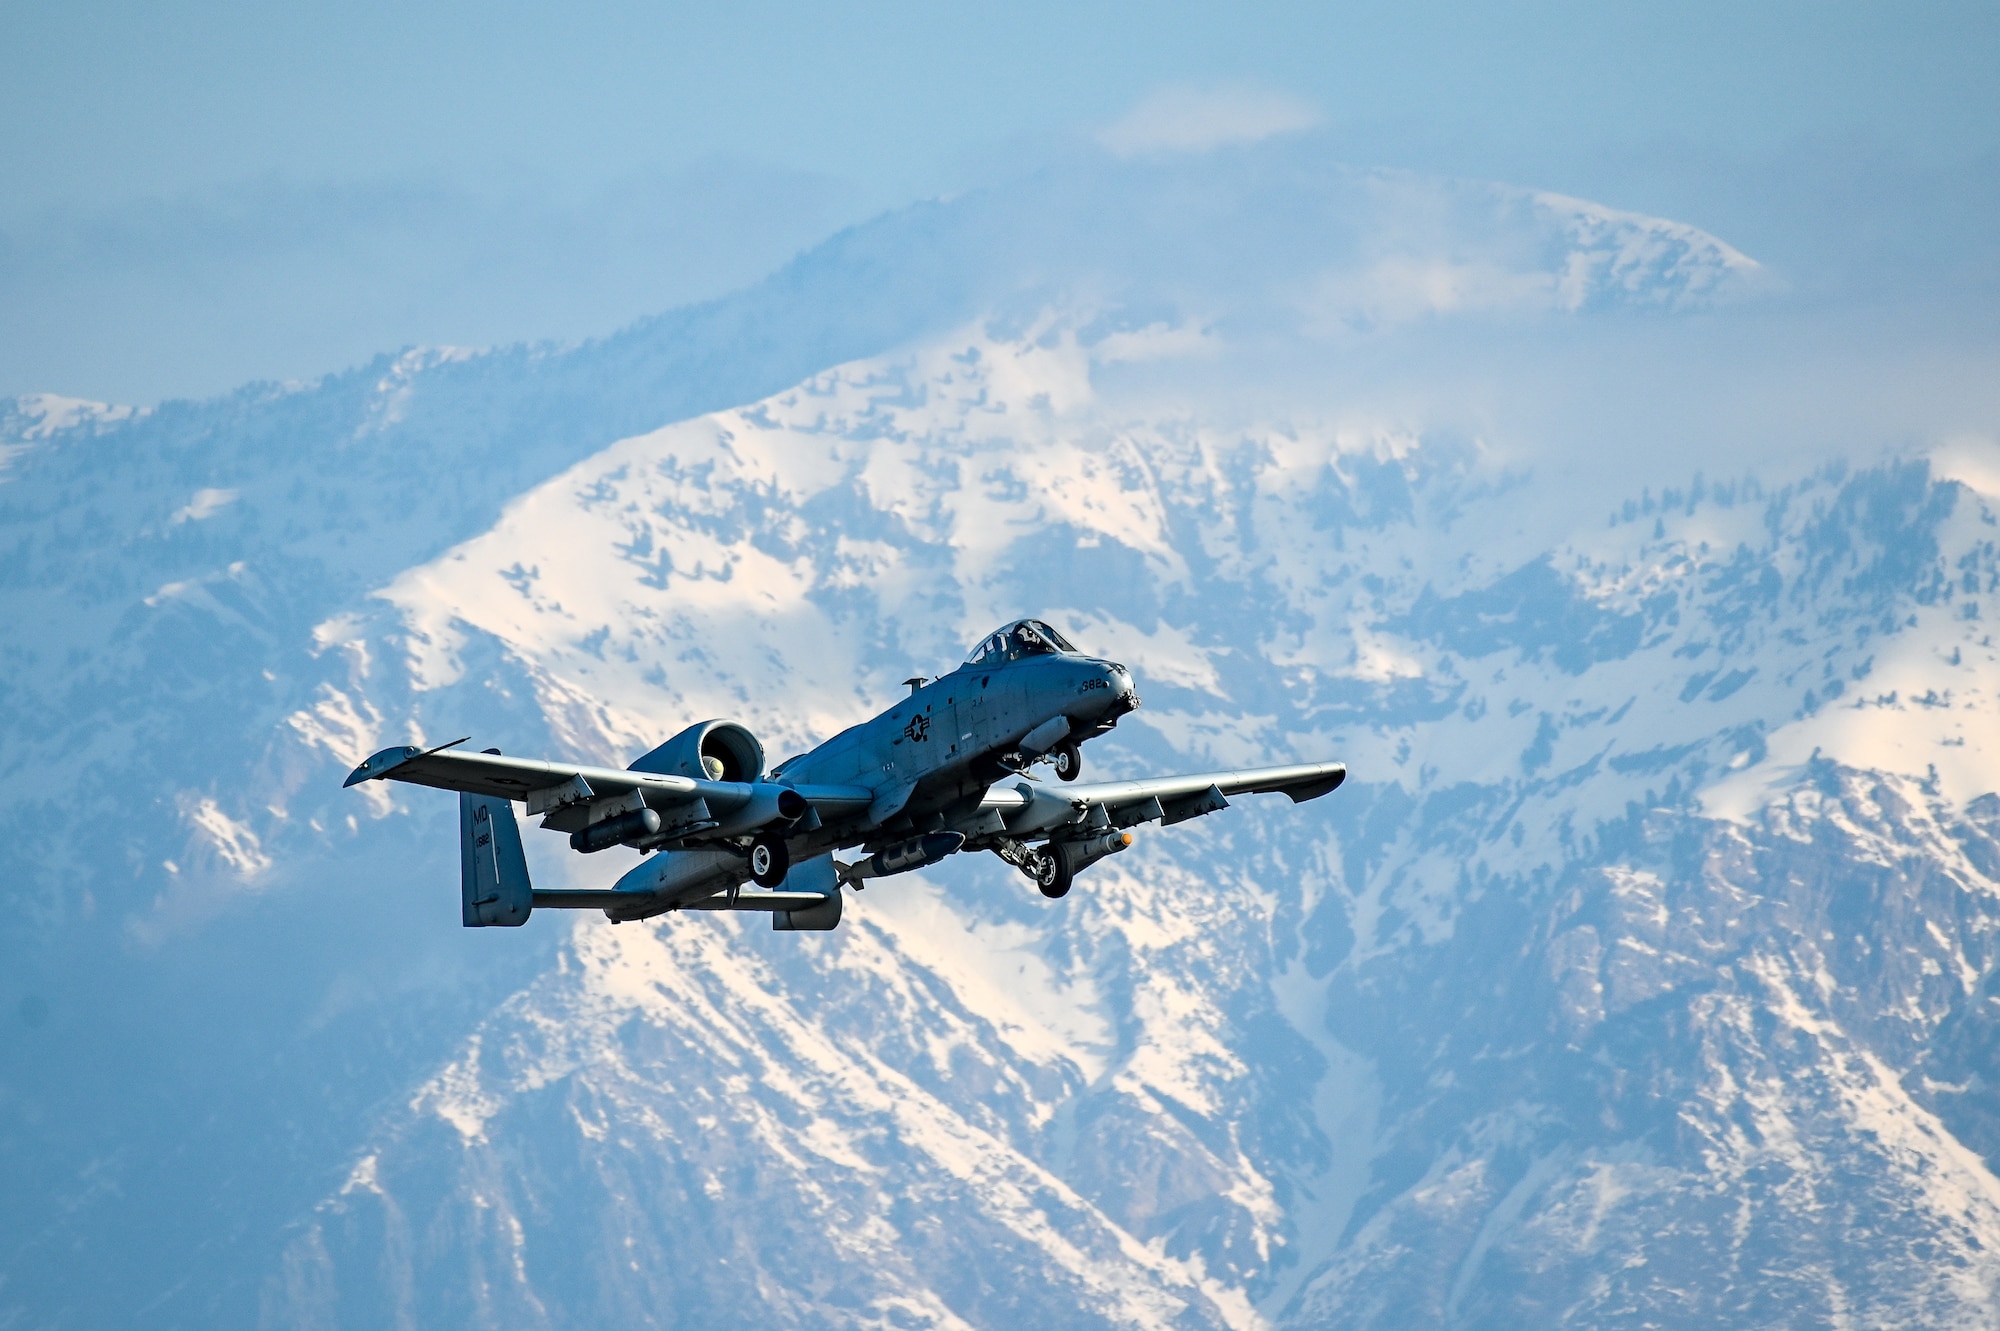 An A-10 Thunderbolt II assigned to the Maryland Air National Guard’s 104th Fighter Squadron takes off